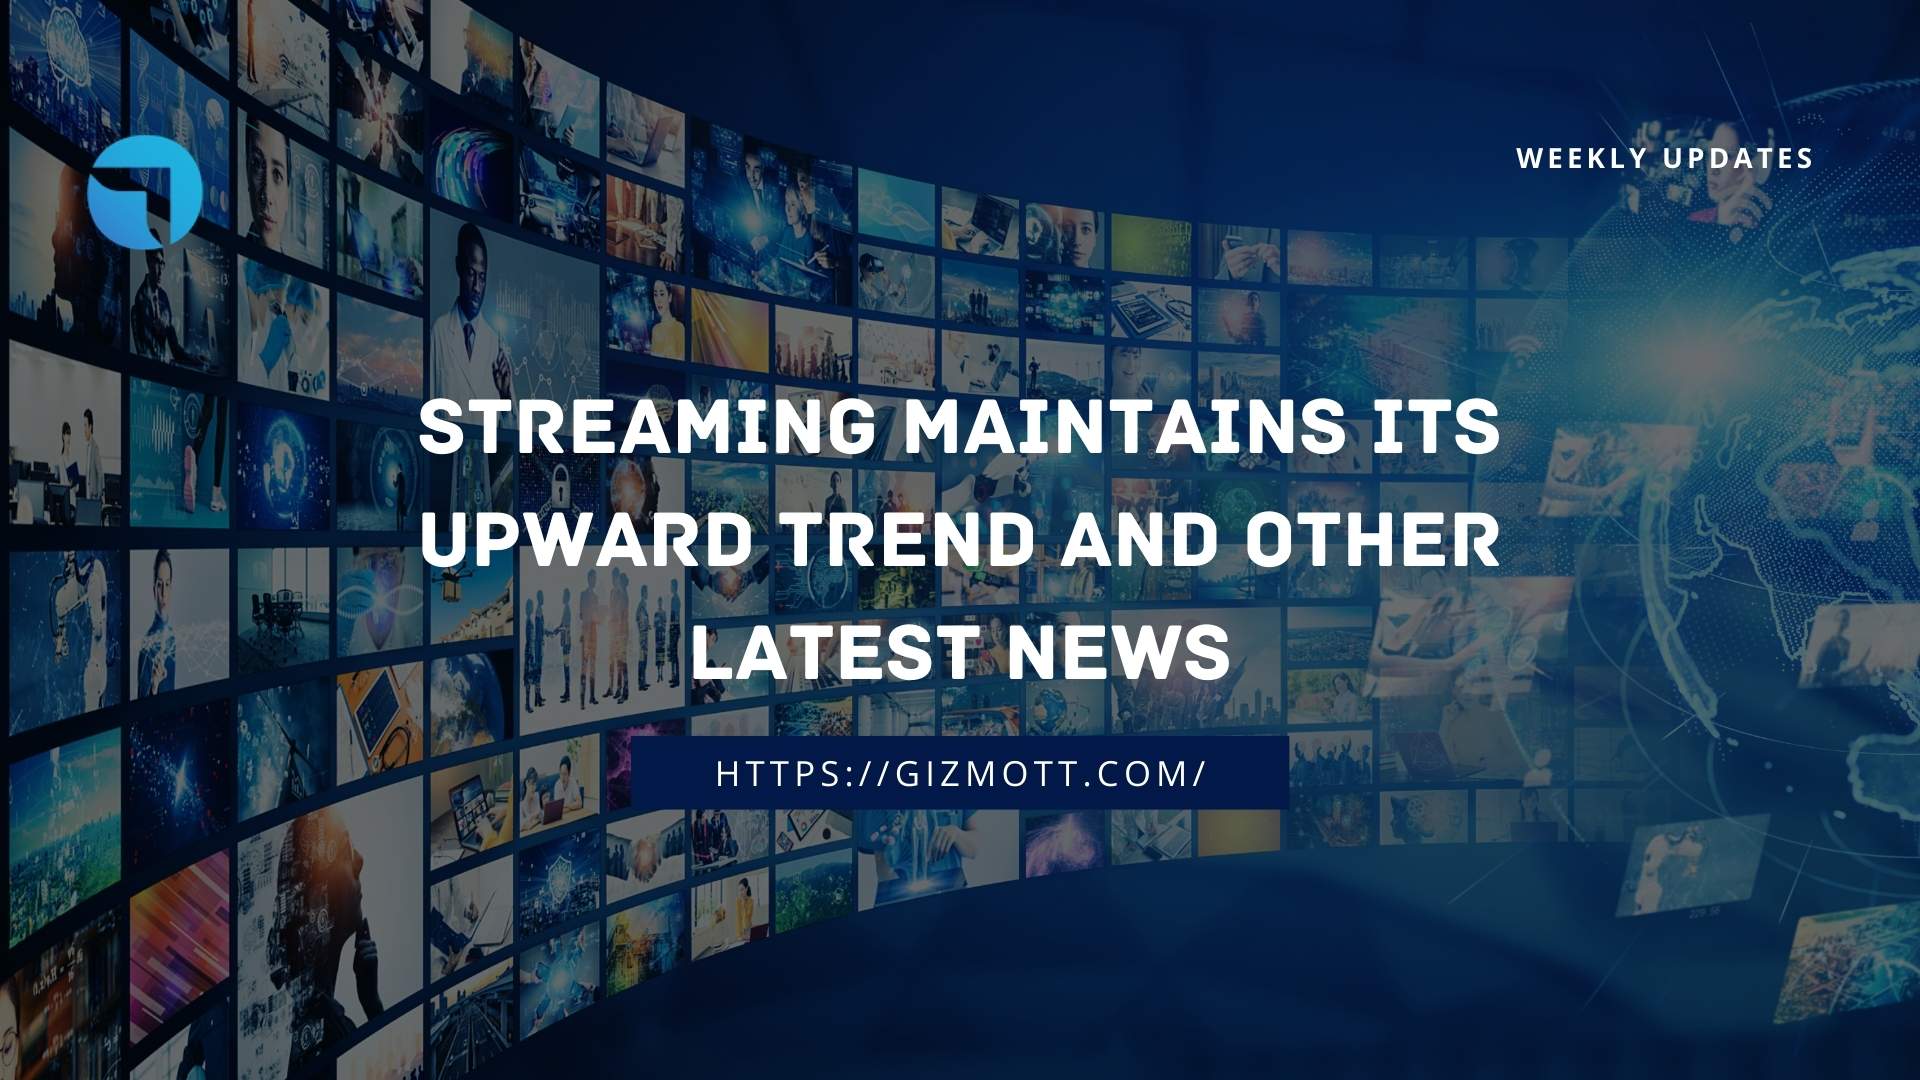 Streaming maintains its upward trend and other latest news